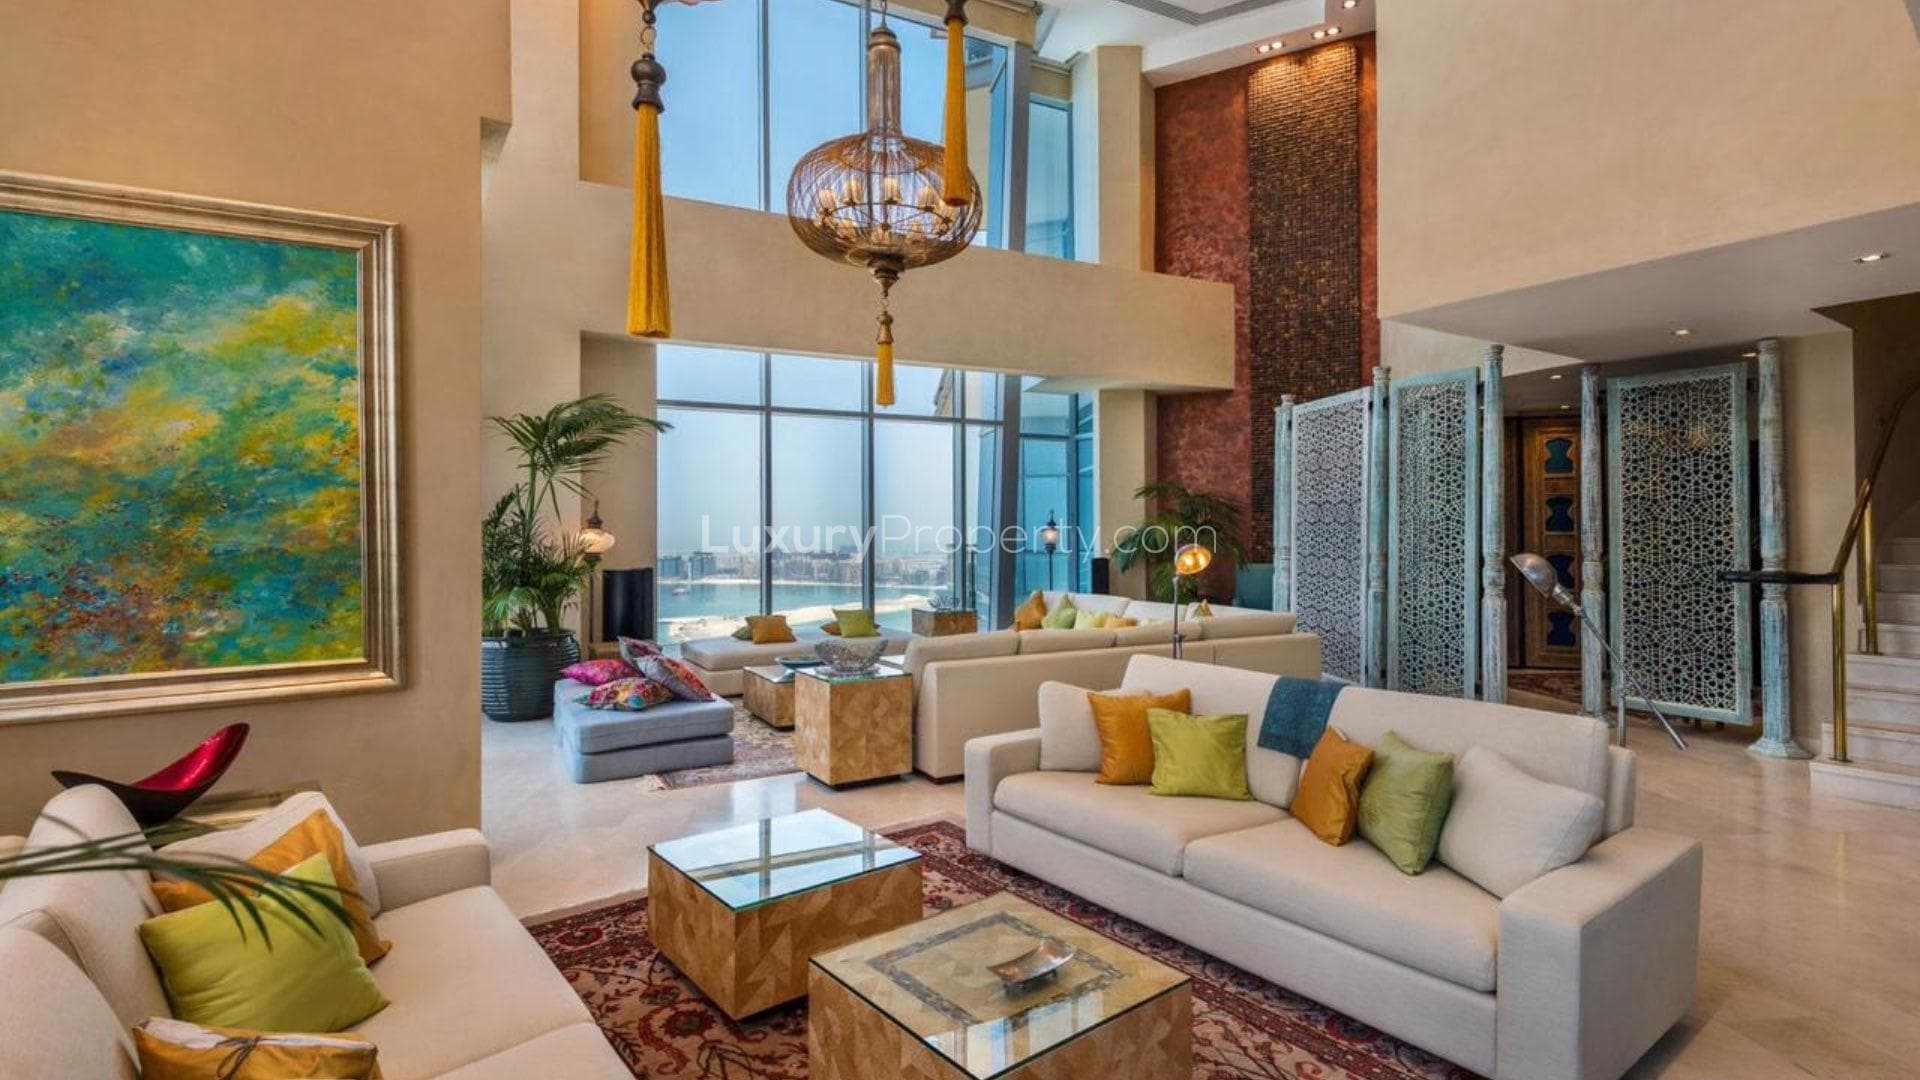 4 Bedroom Penthouse For Sale Trident Grand Residence Lp17461 209d7290ab477800.jpg